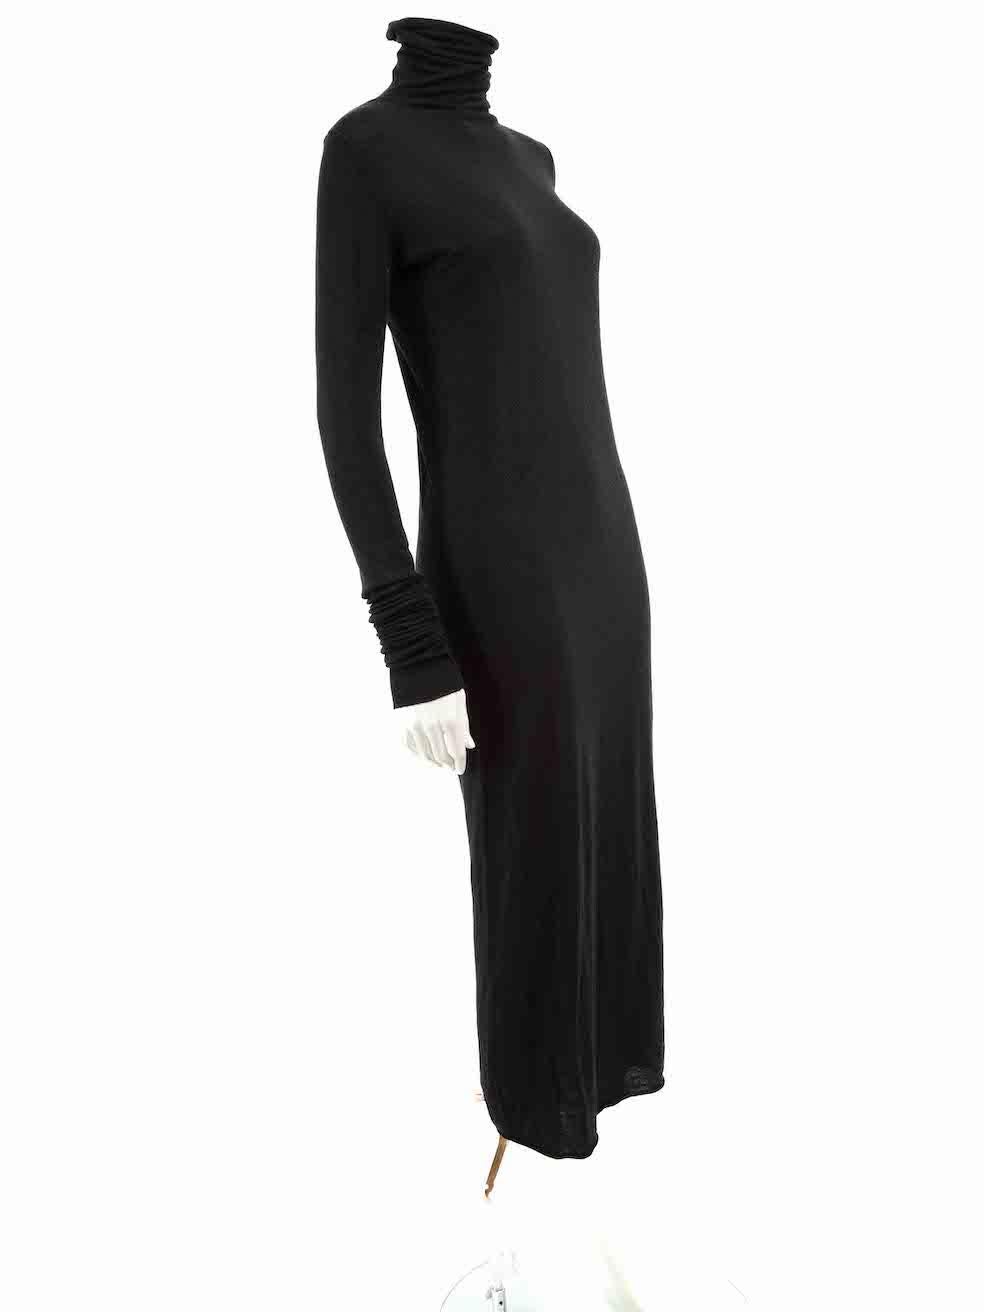 CONDITION is Very good. Minimal pilling to overall dress is evident. The composition and size label has been removed on this used Rick Owens Lilies designer resale item.
 
 
 
 Details
 
 
 Black
 
 Wool
 
 Long sleeves dress
 
 Maxi length
 
